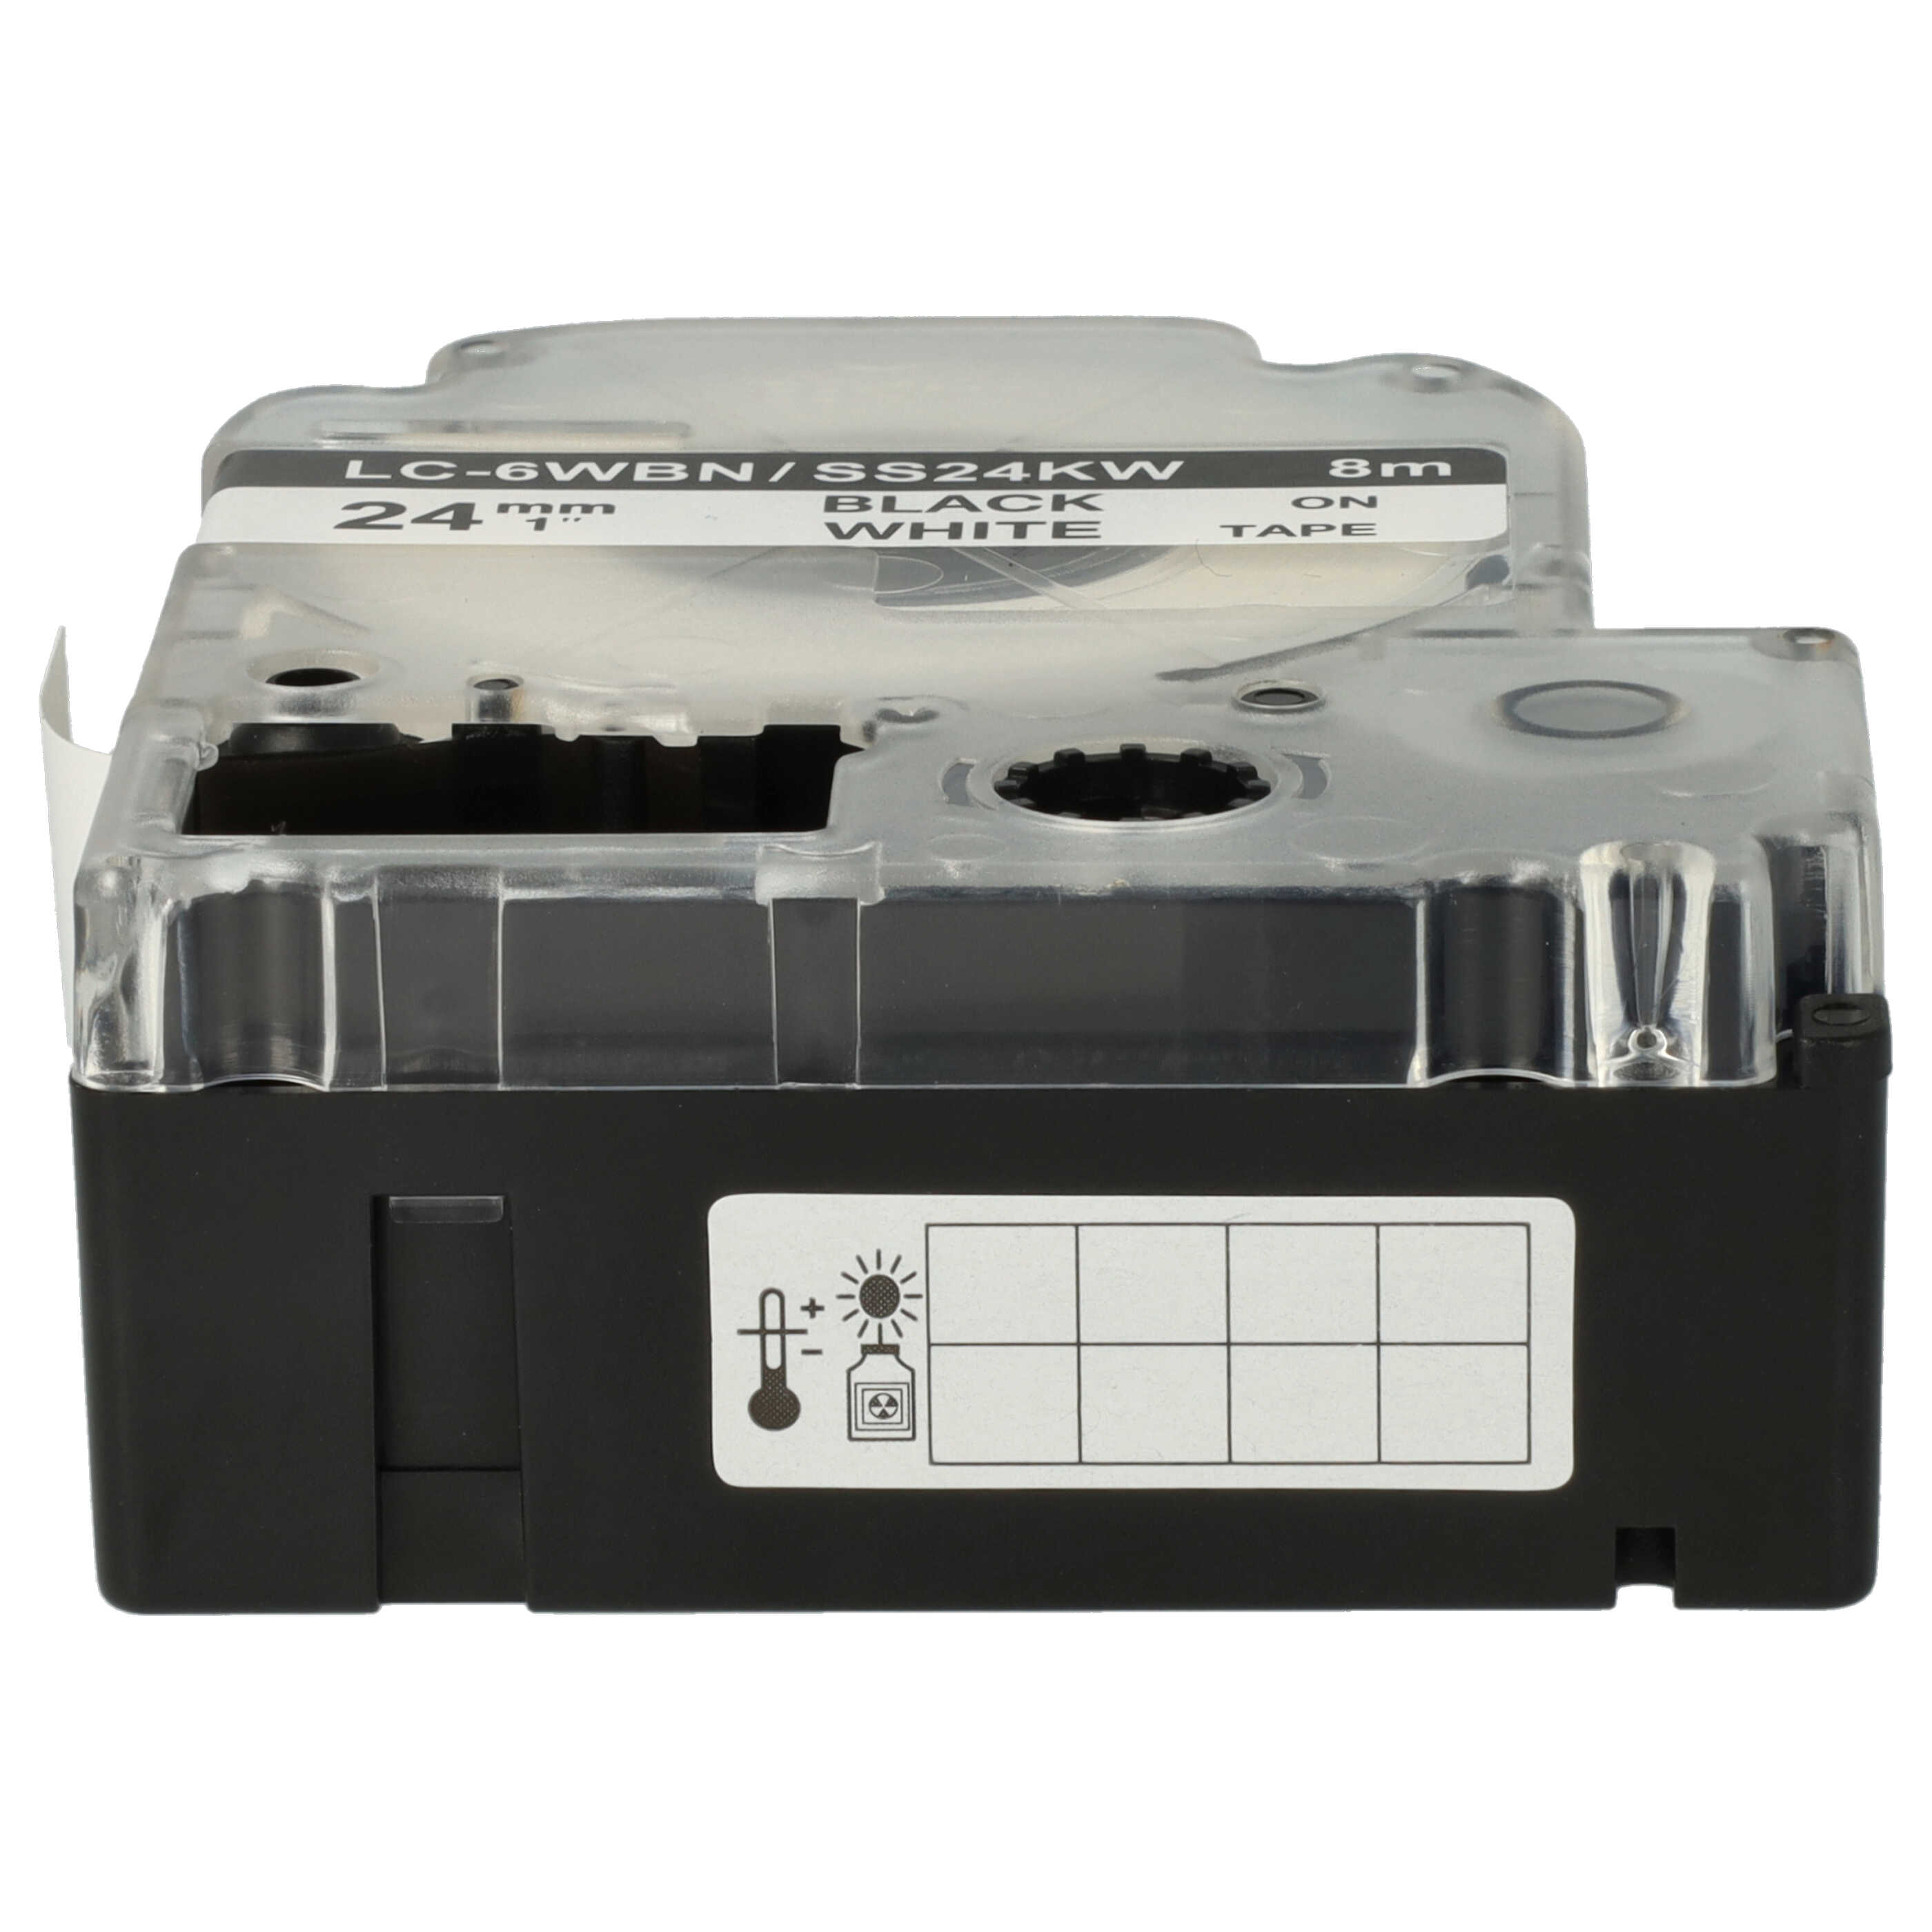 5x Label Tape as Replacement for Epson LC-6WBN - 24 mm Black to White